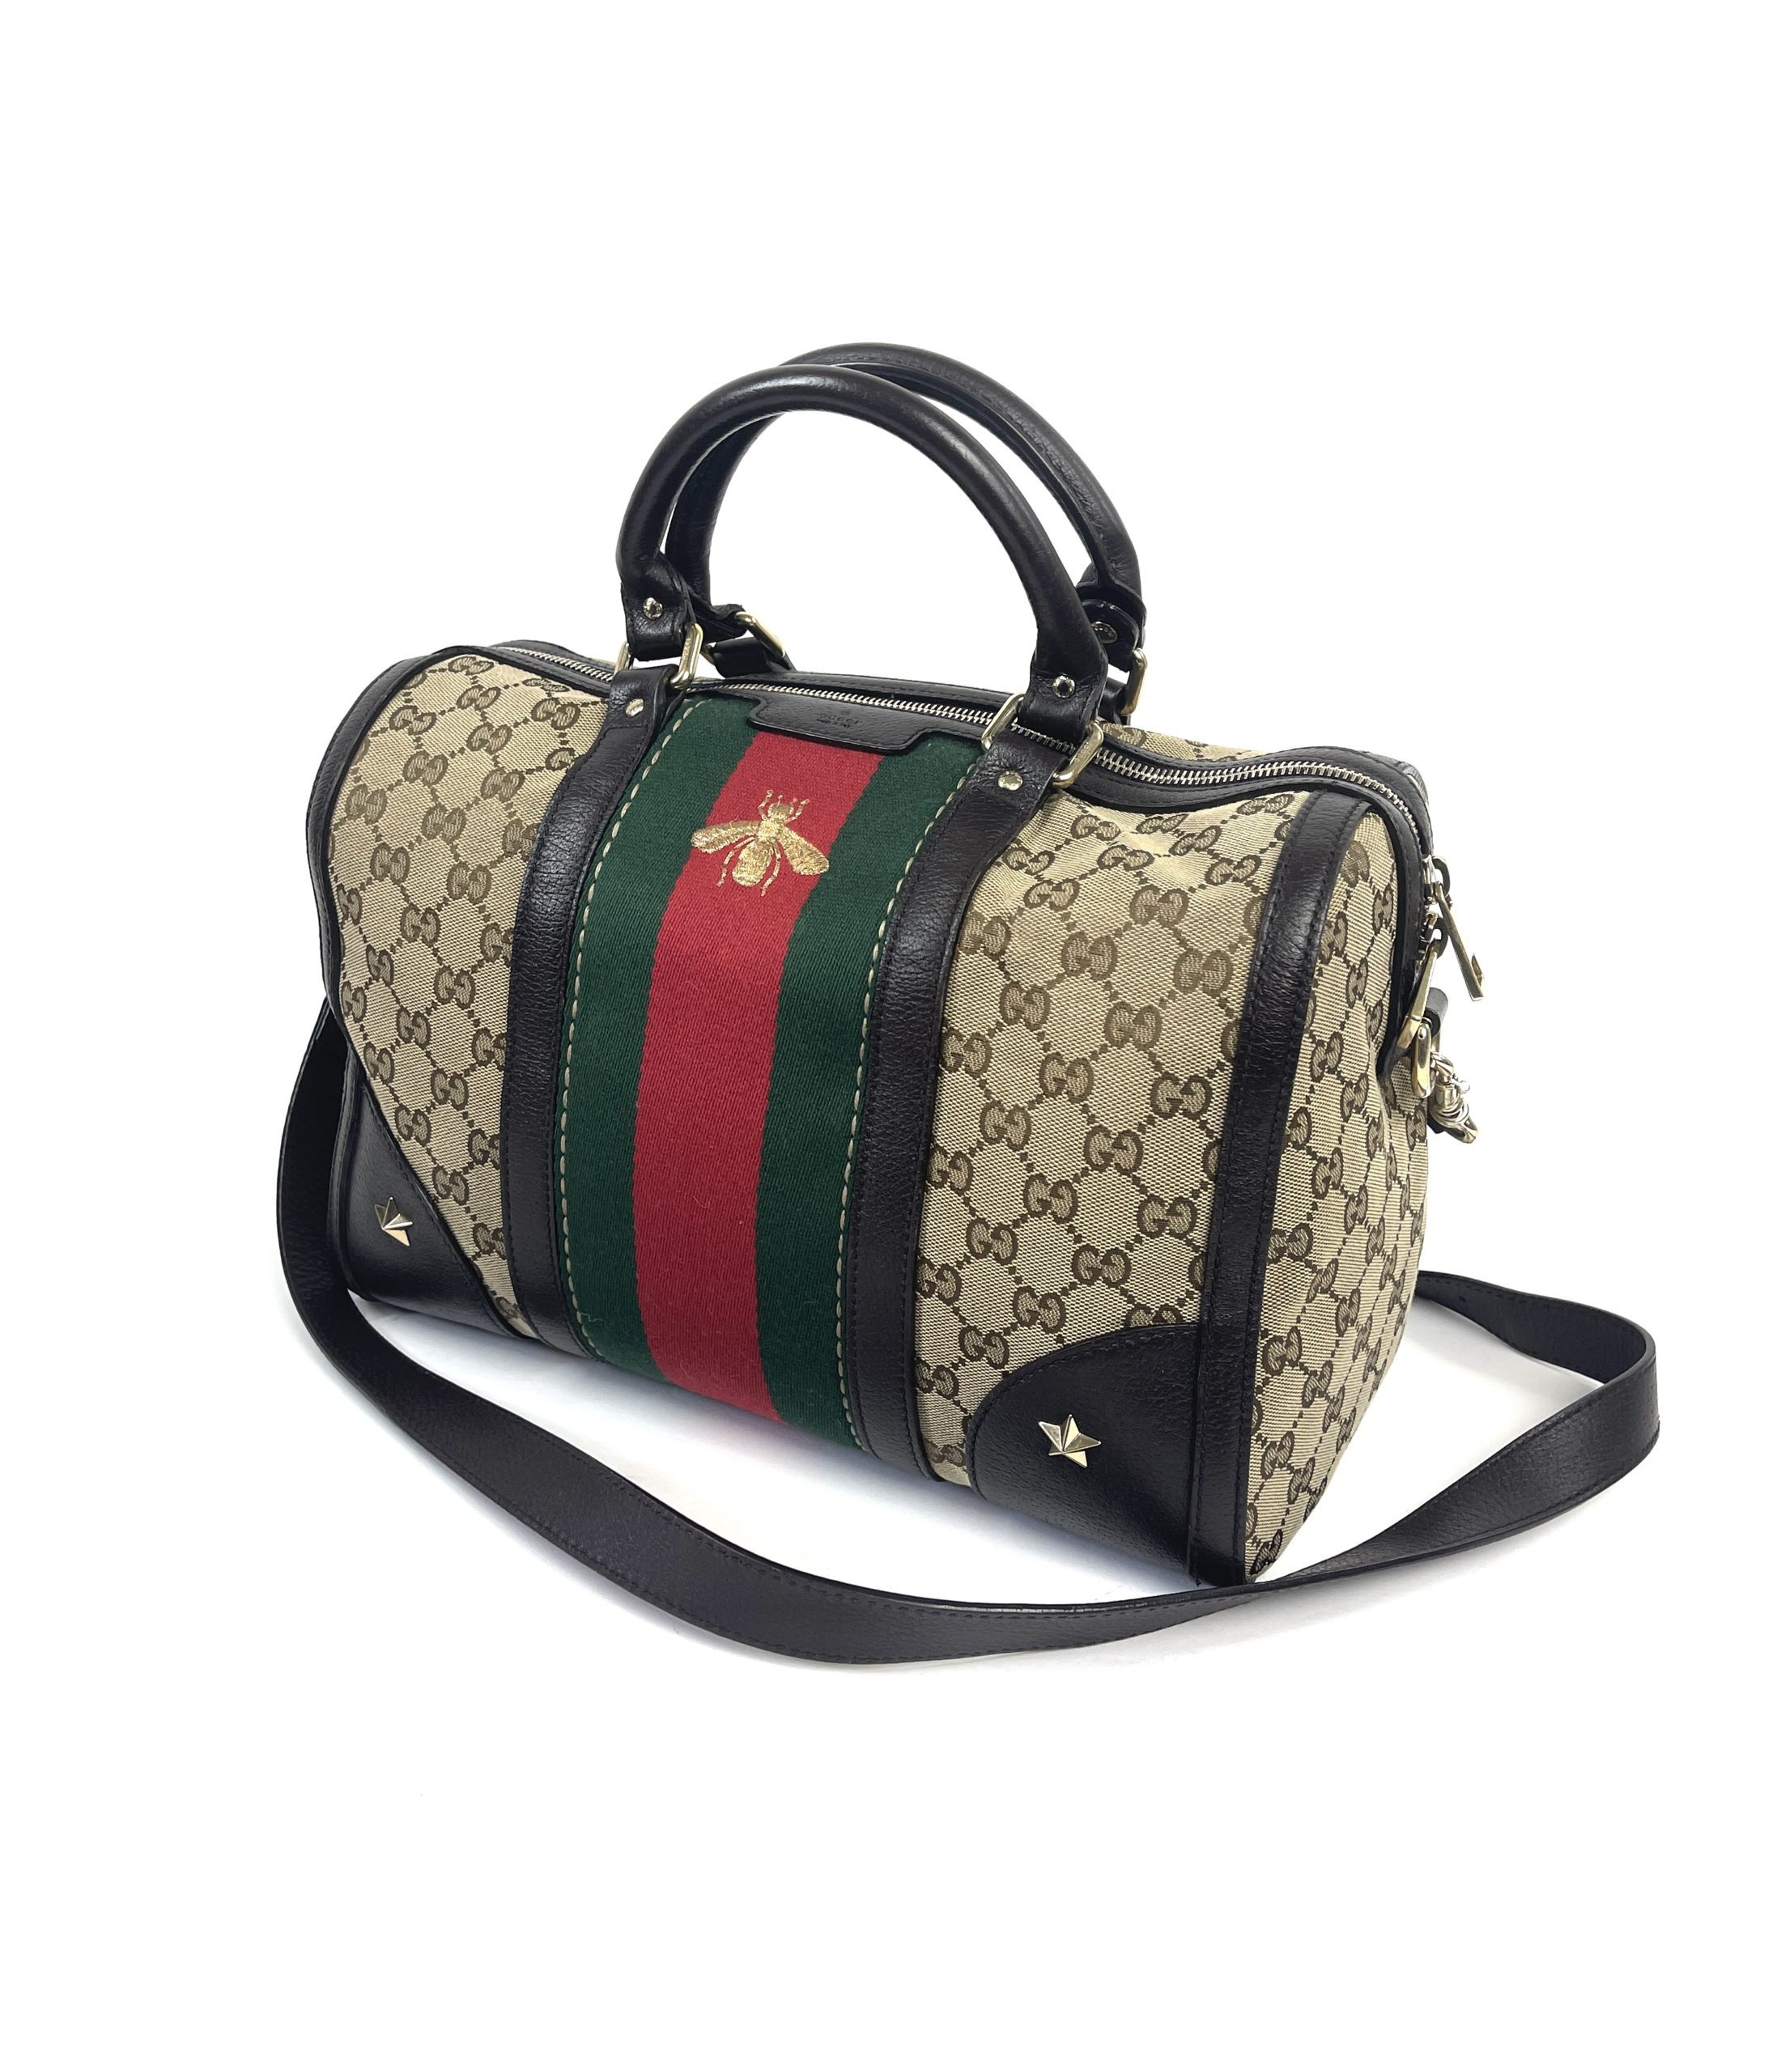 GUCCI Black Web Bee Leather Camera Crossbody Bag – Fashion Reloved